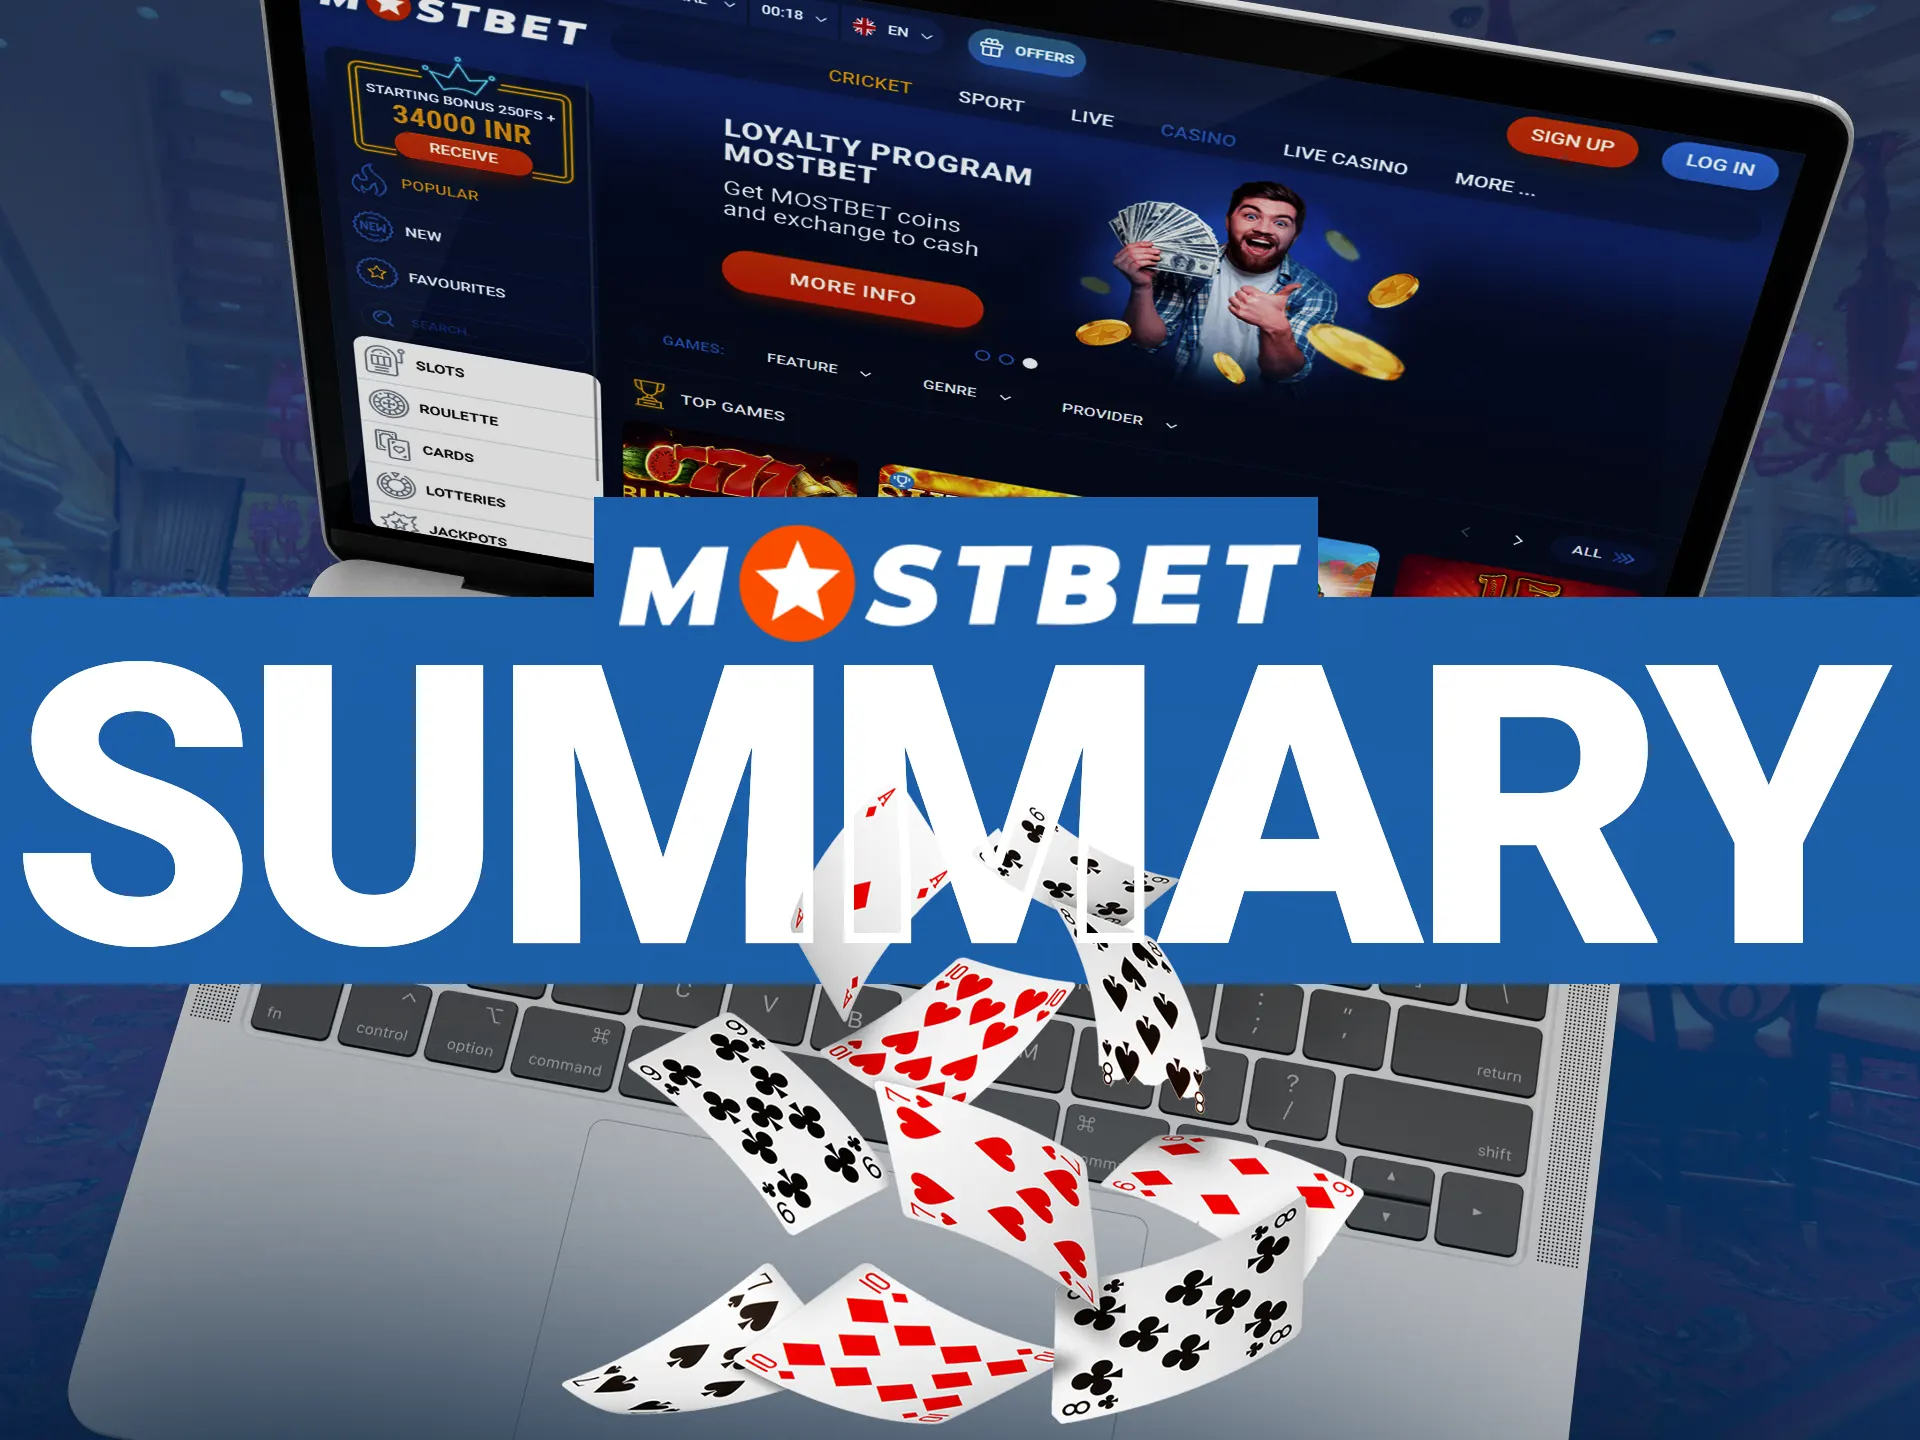 Mostbet Casino presents a captivating and potentially lucrative online gaming destination for anyone seeking a thrilling experience.